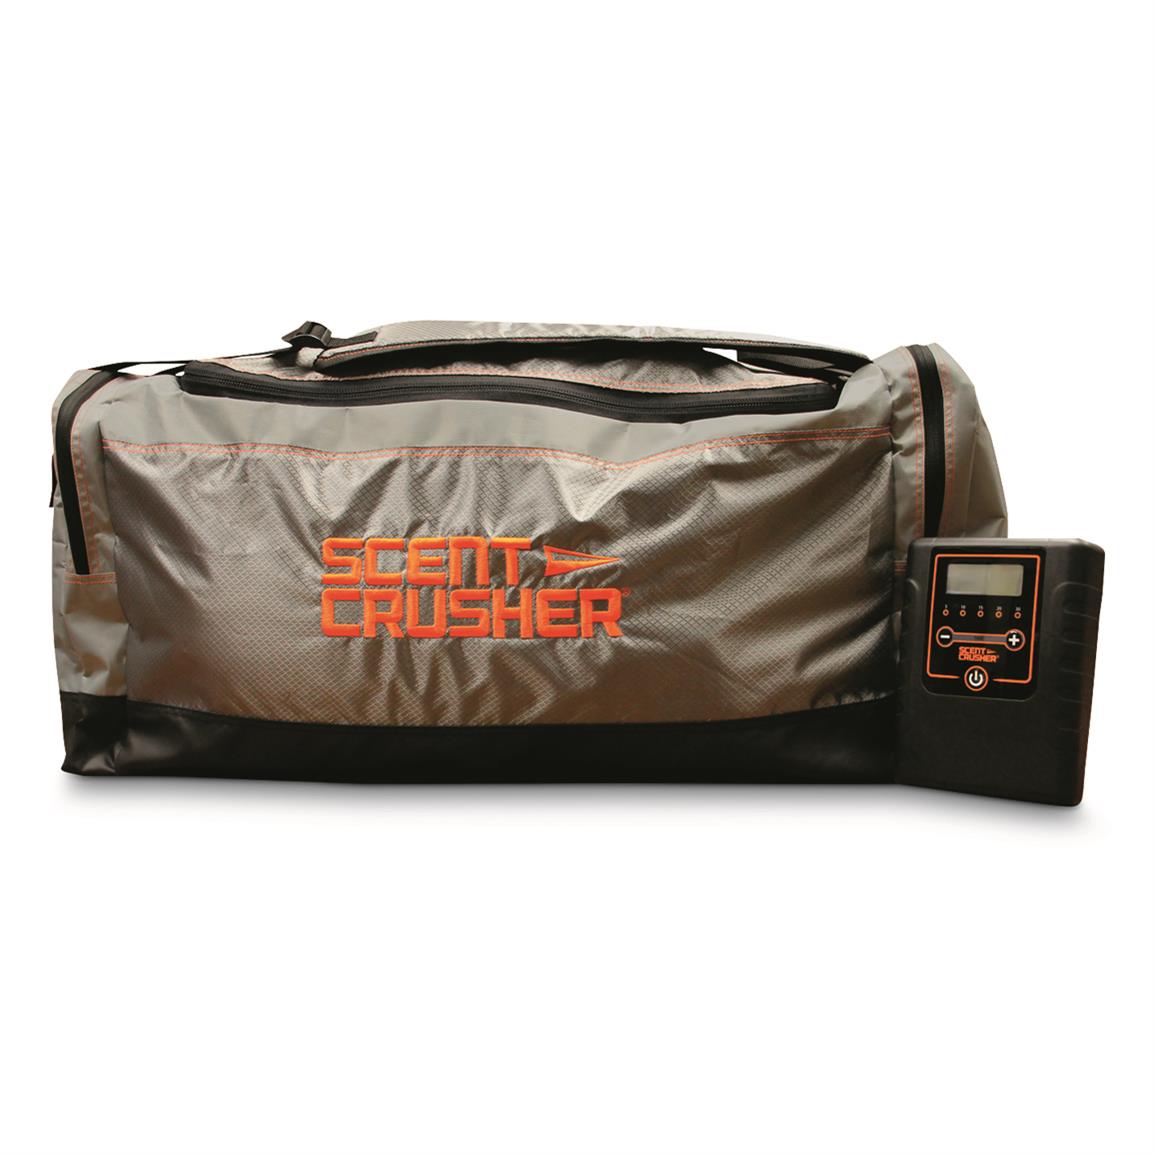 Includes Gear Bag and portable ozone unit